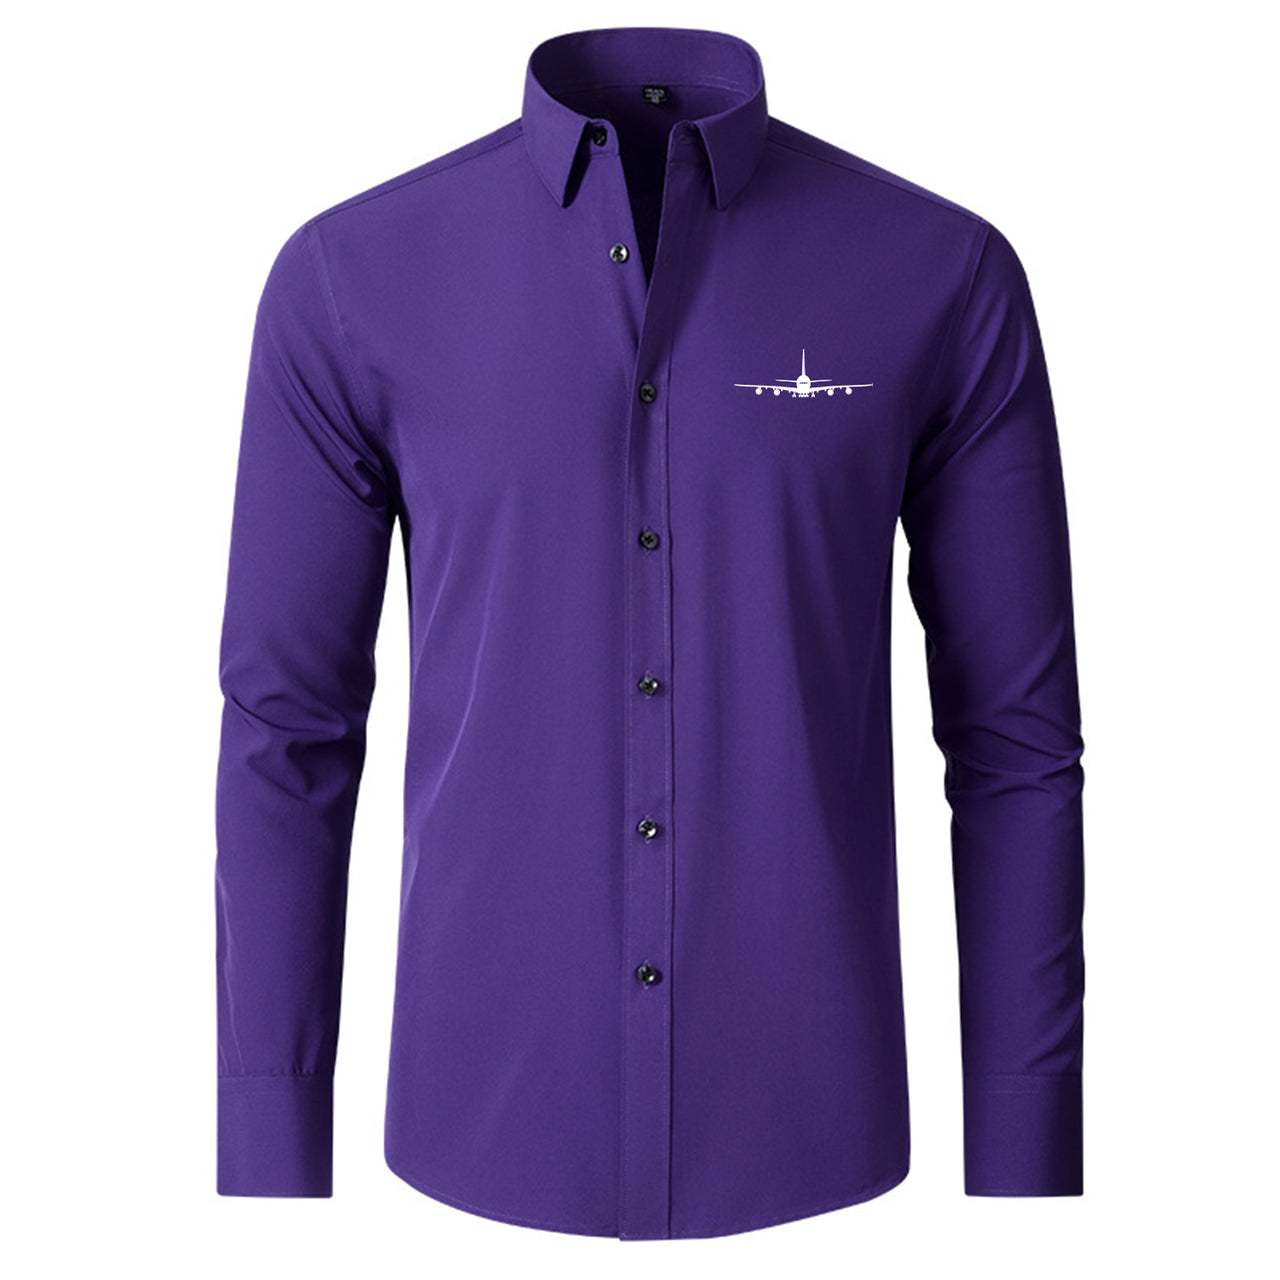 Airbus A380 Silhouette Designed Long Sleeve Shirts